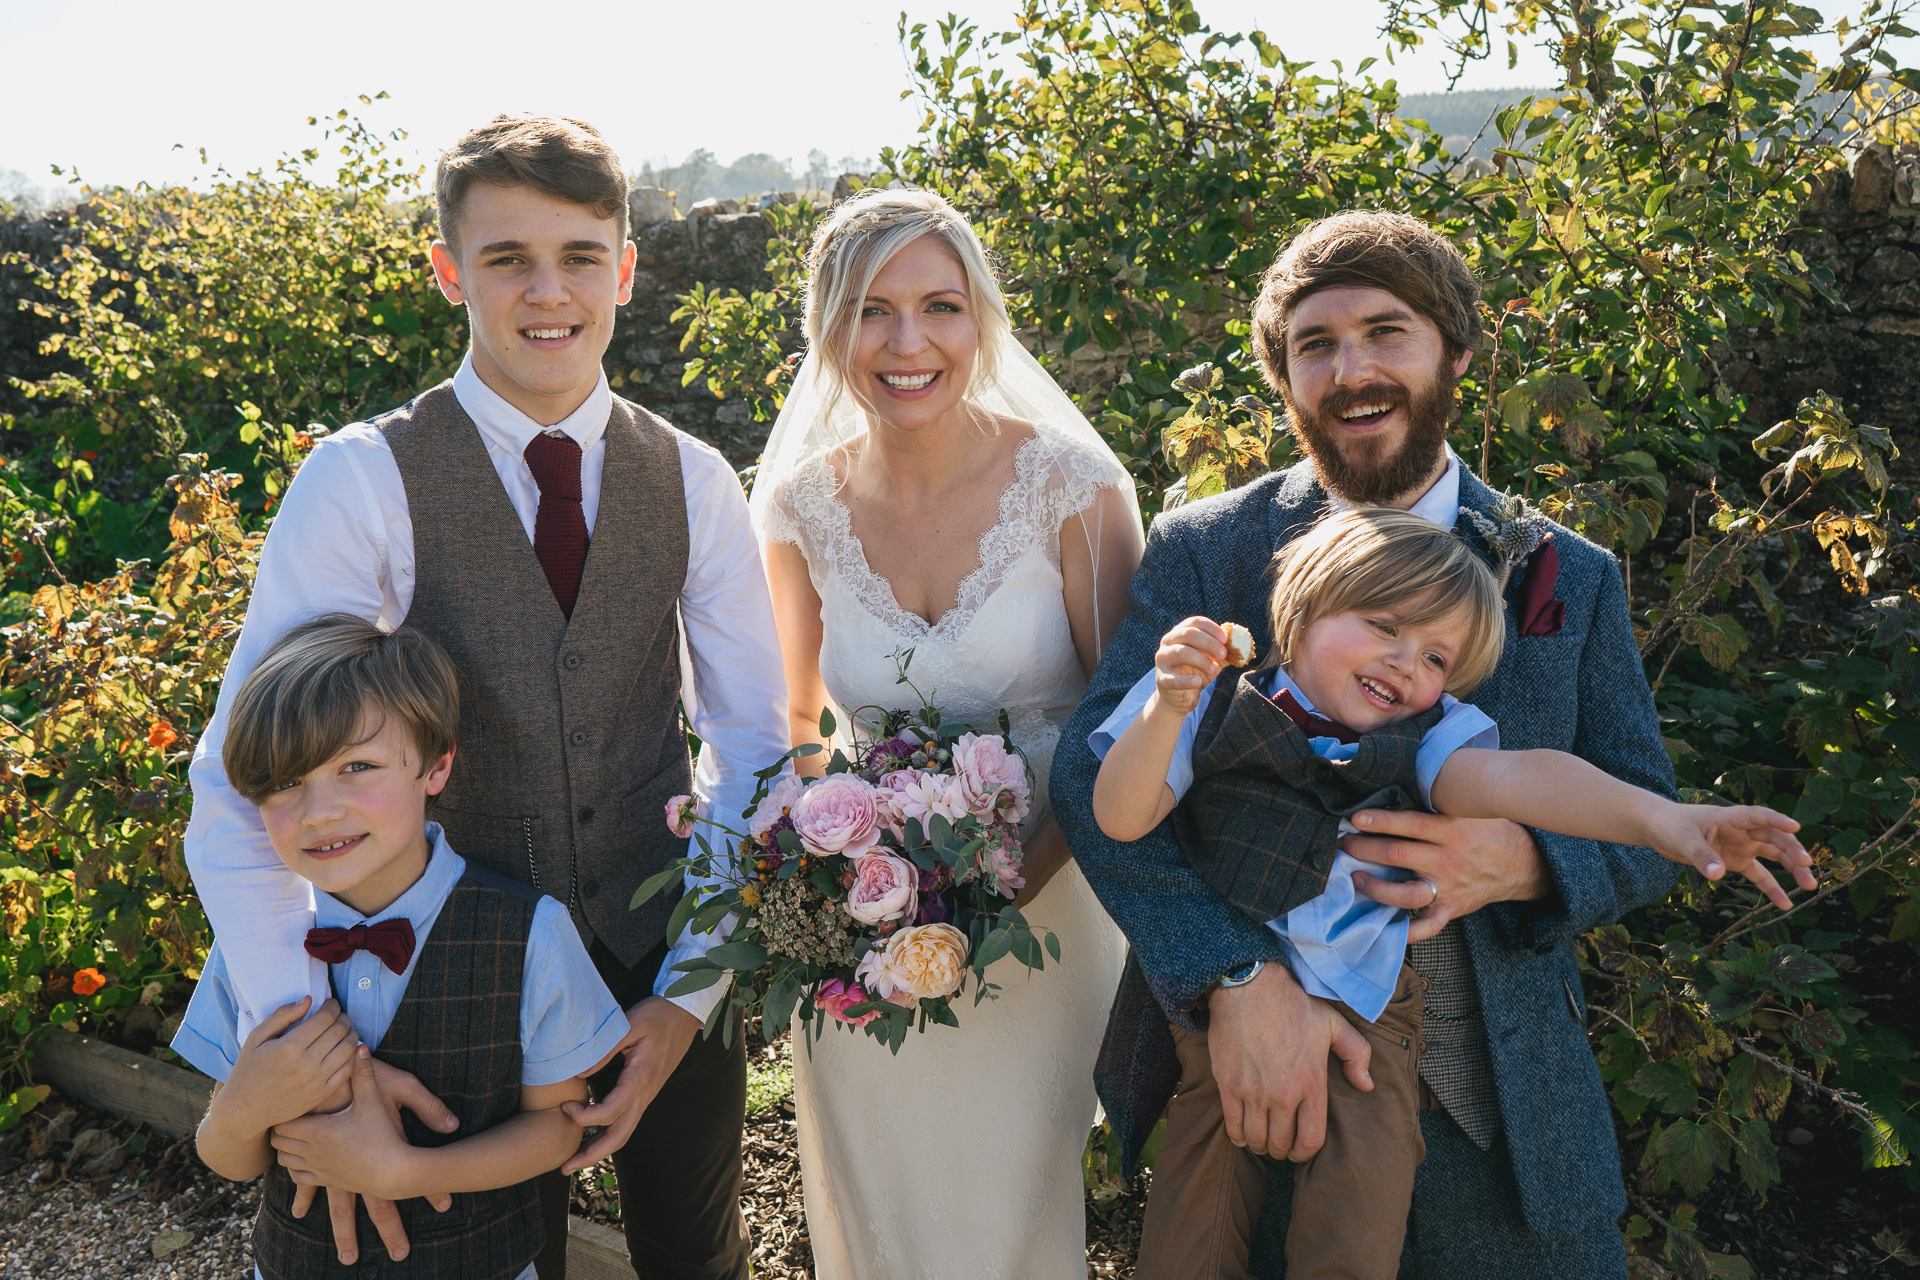 Bride and groom with family in the kitchen garden